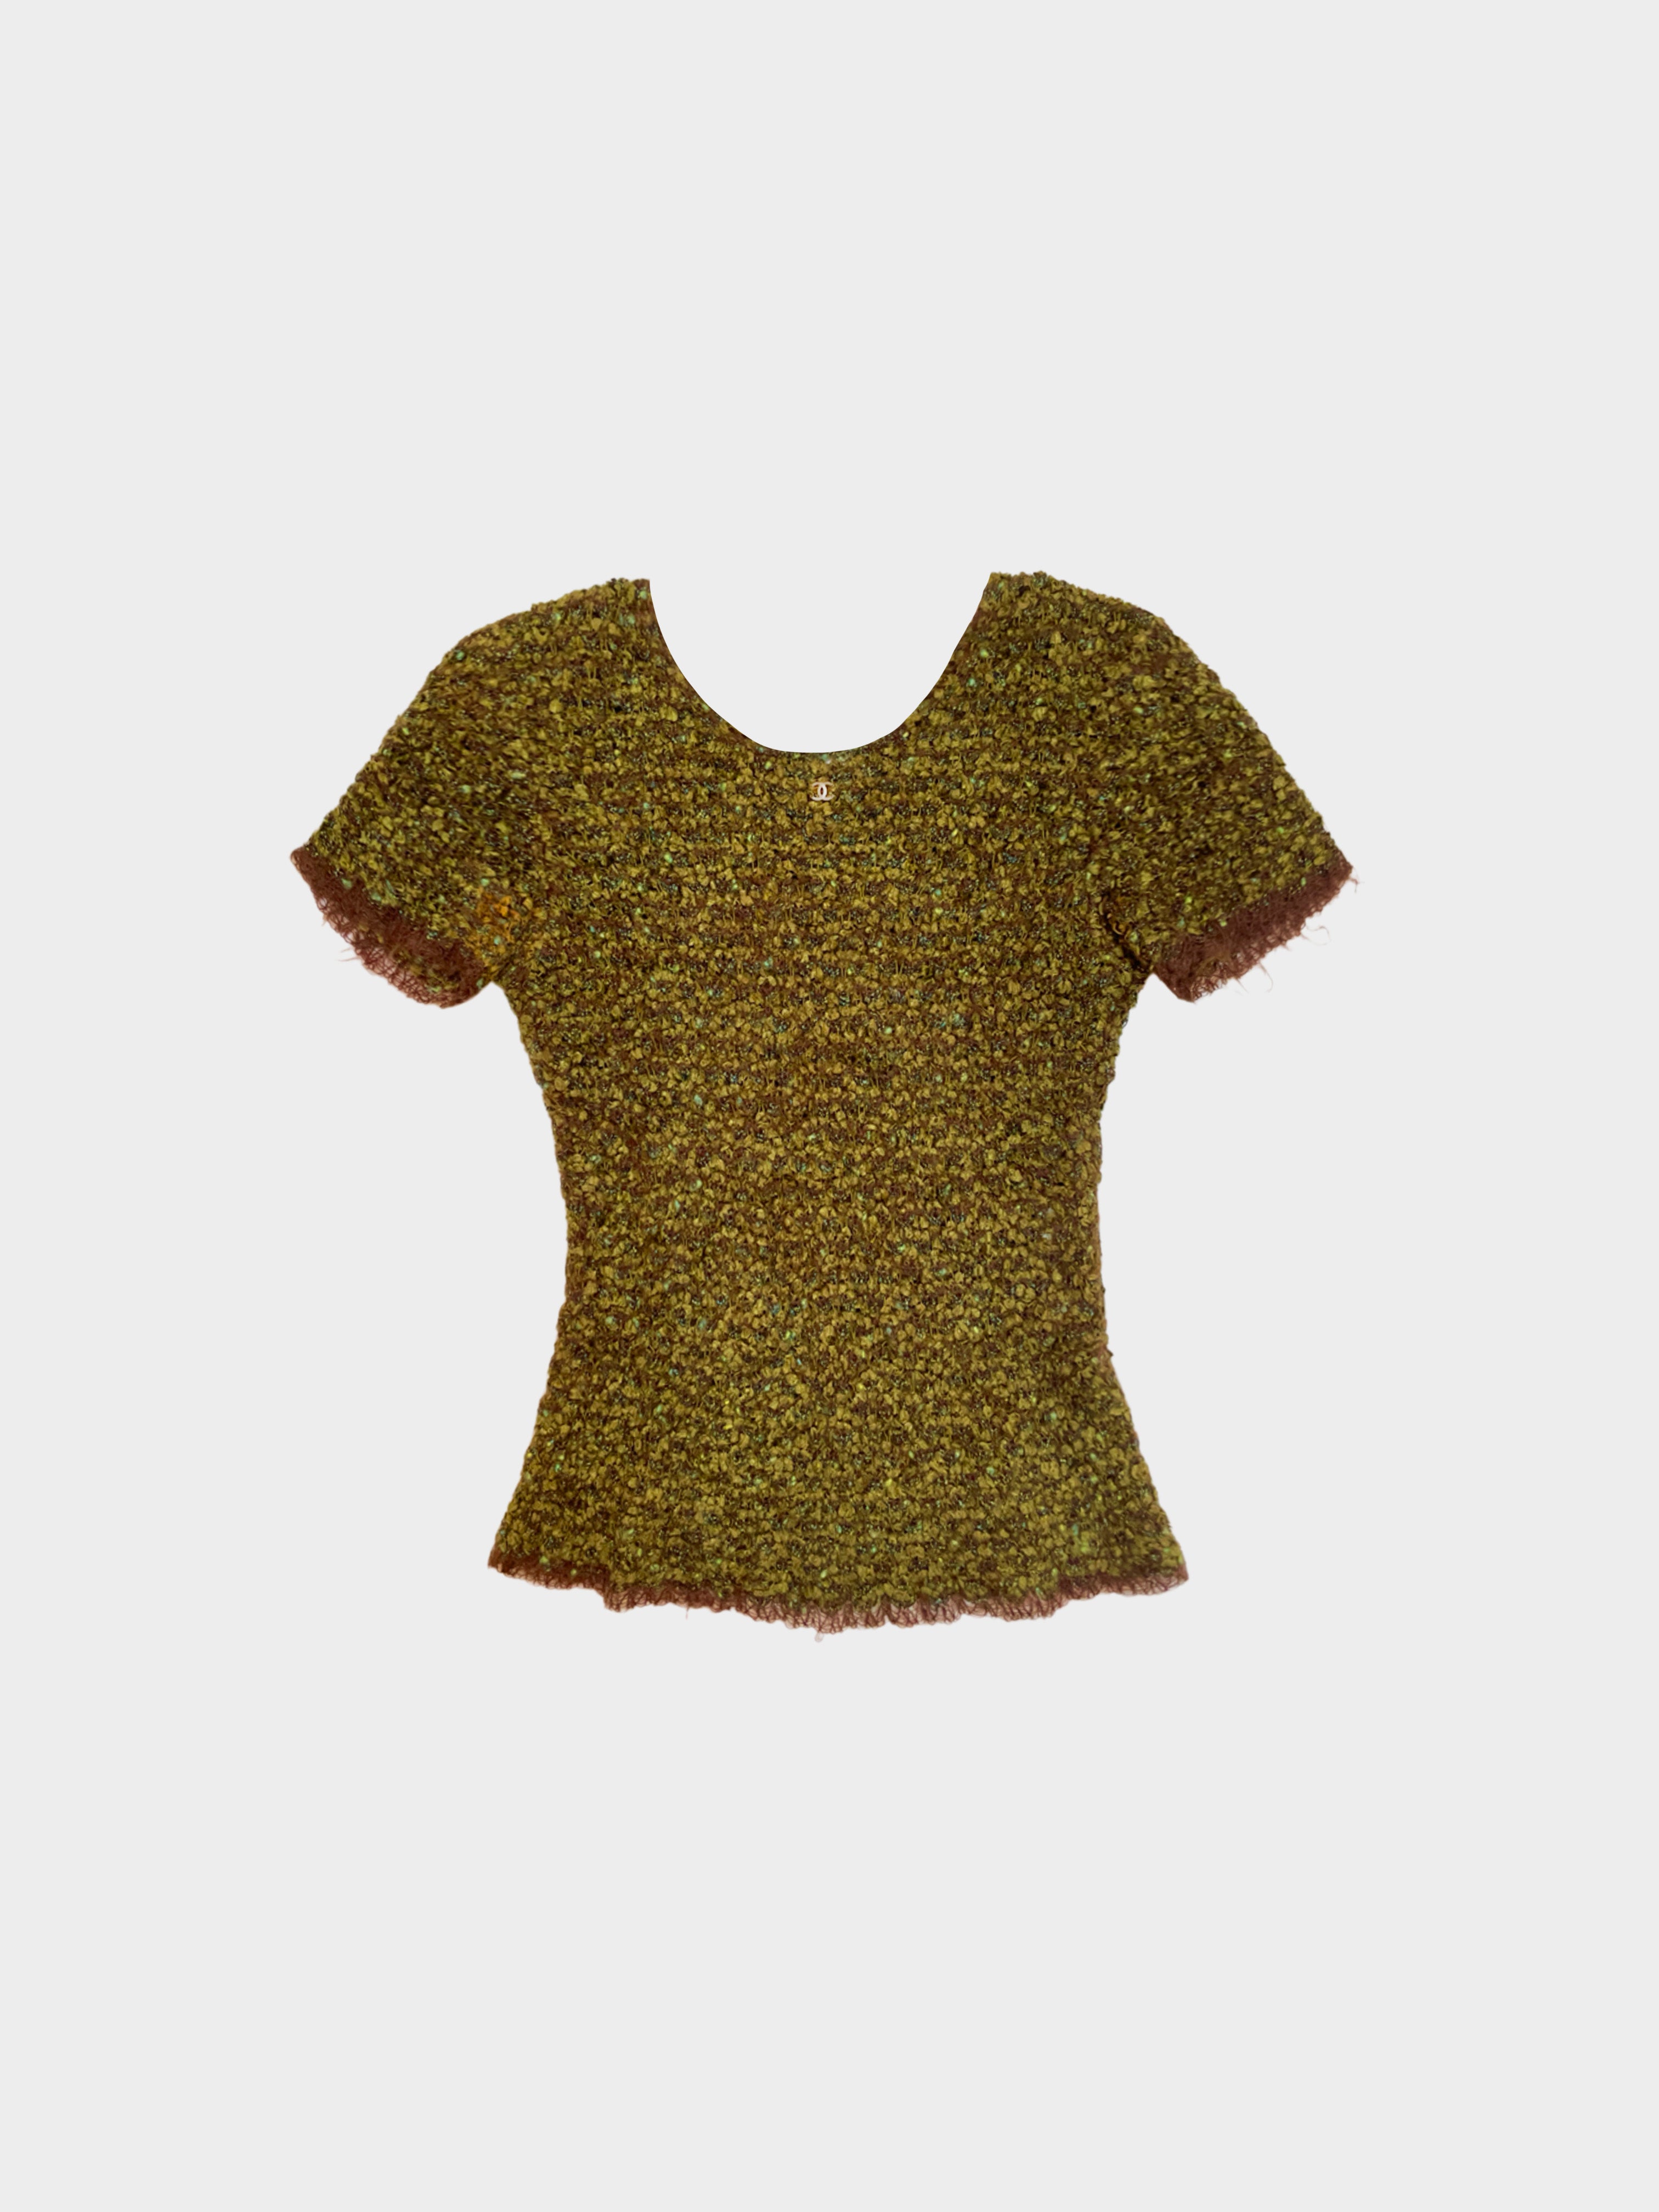 Chanel AW 1998 Tweed Mohair Knit Top